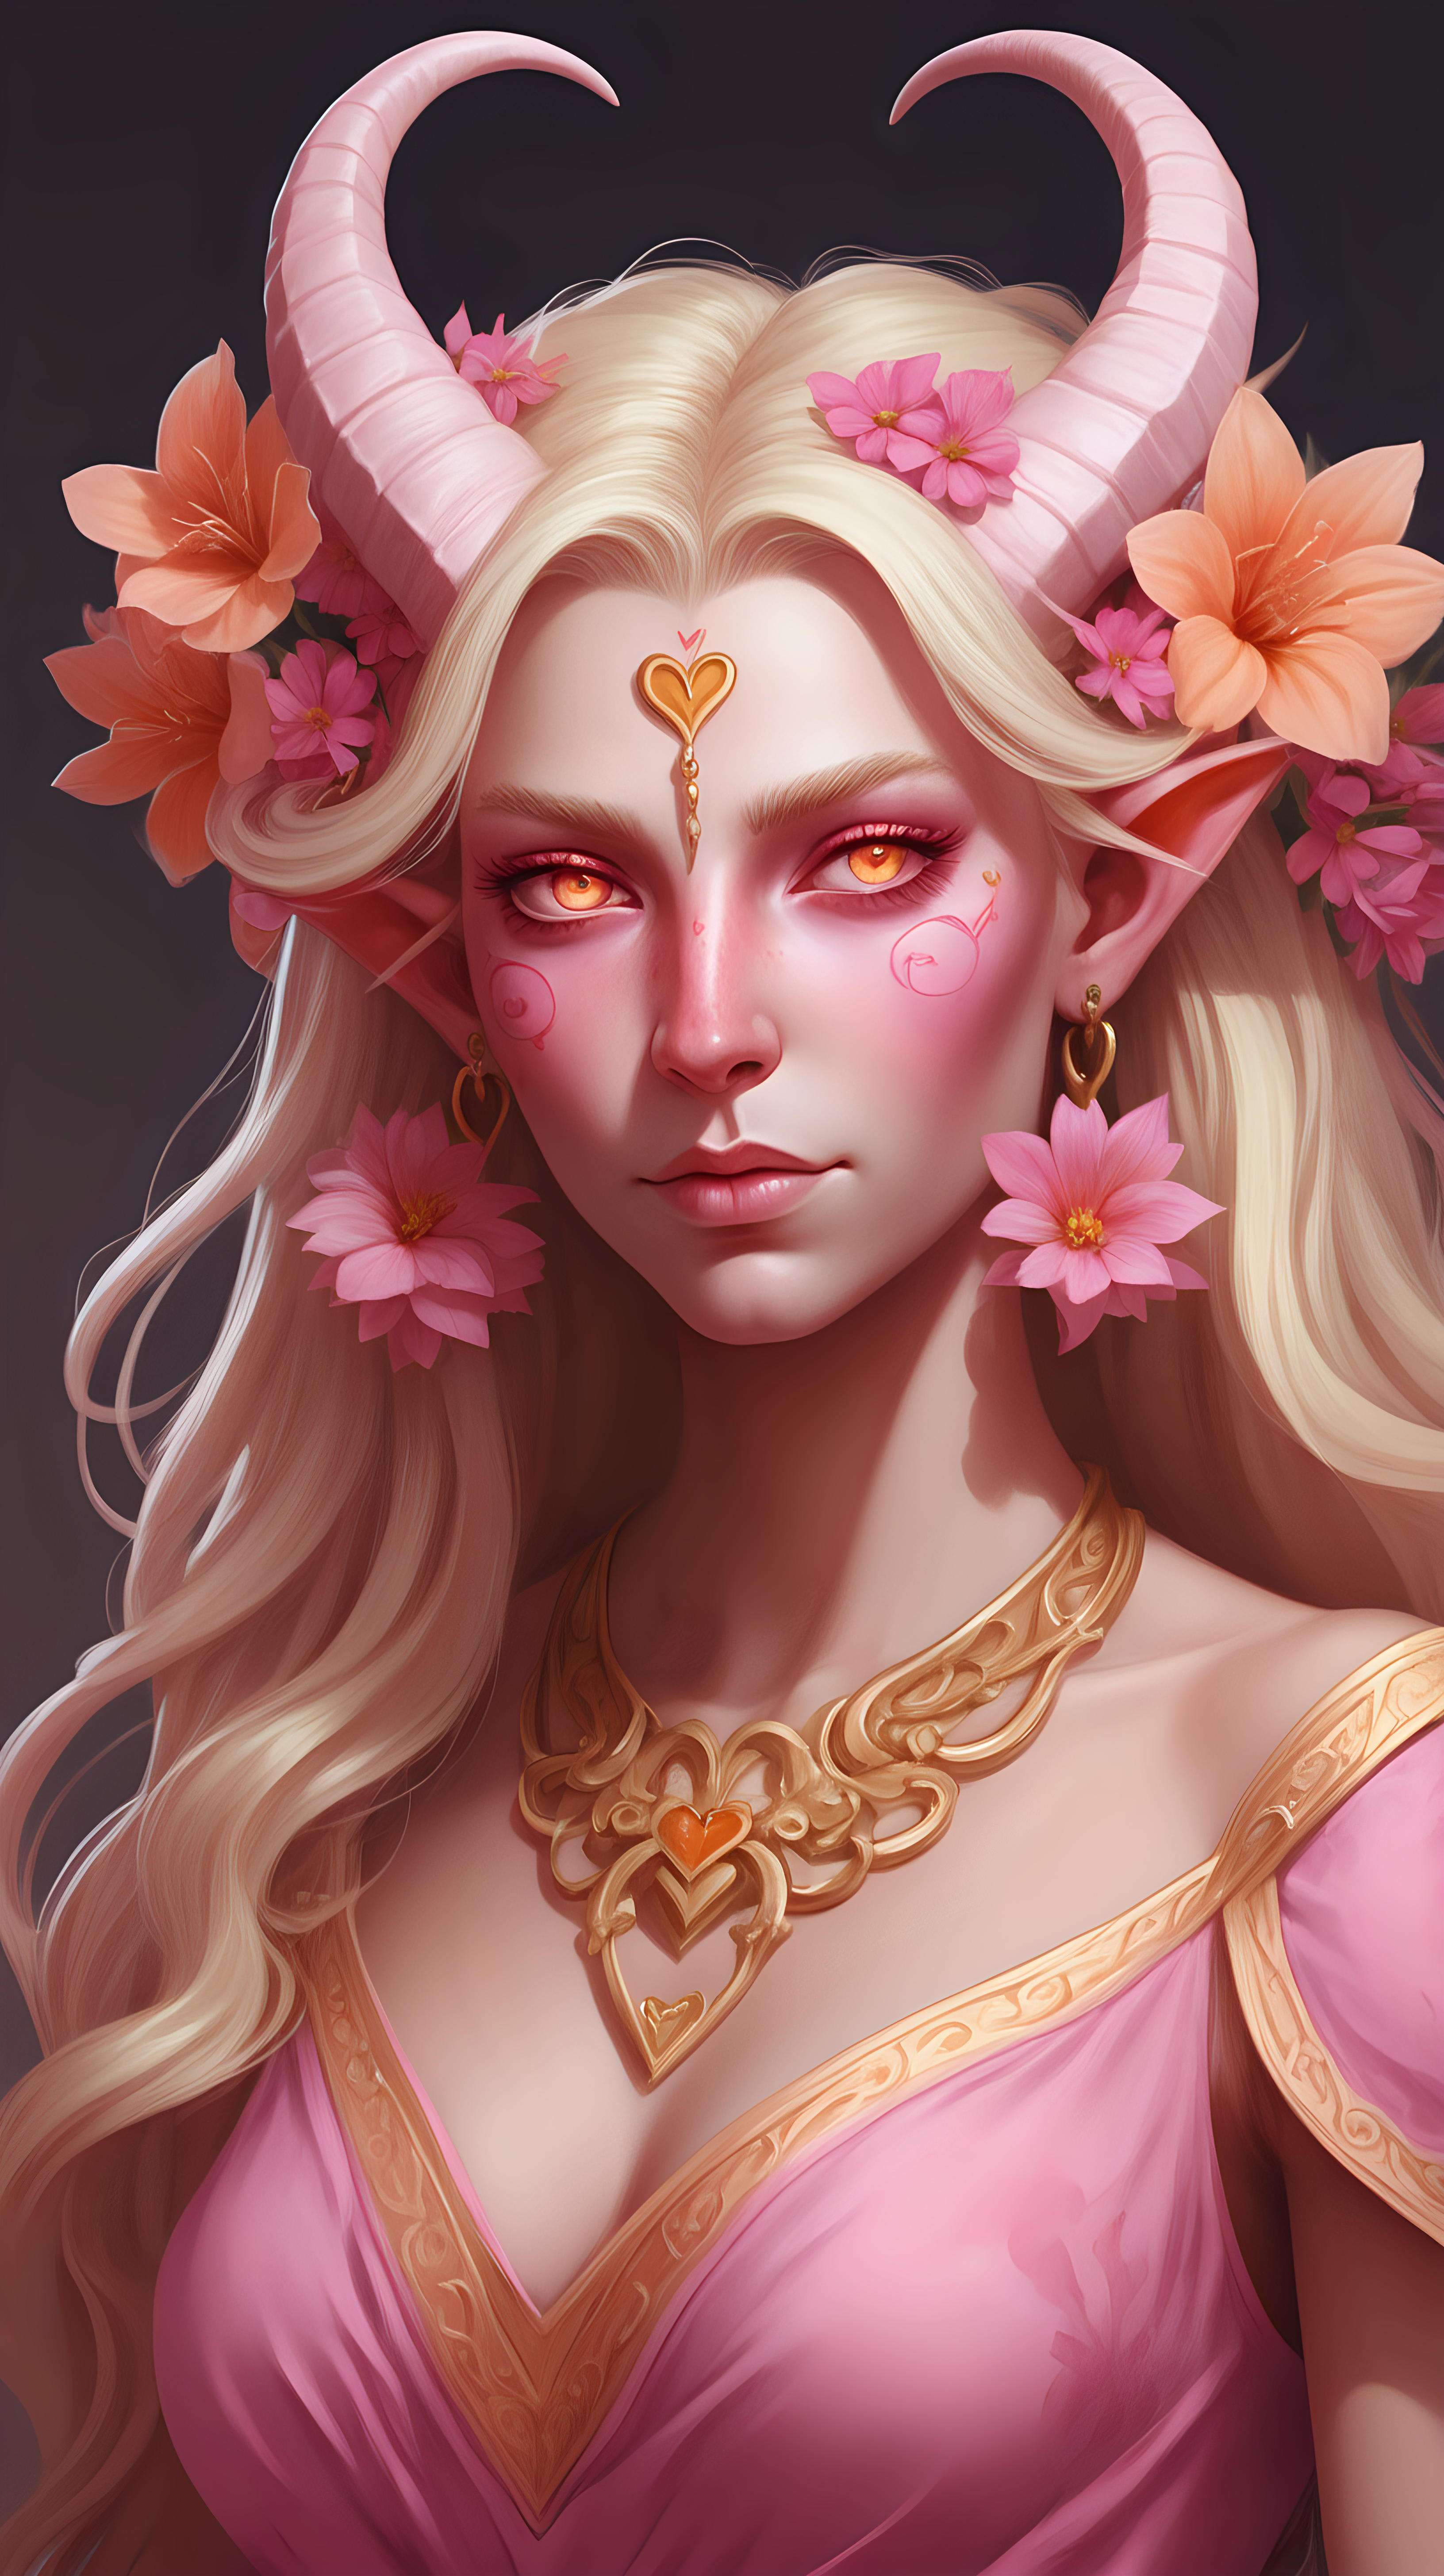 Tiefling woman with pink skin She has white